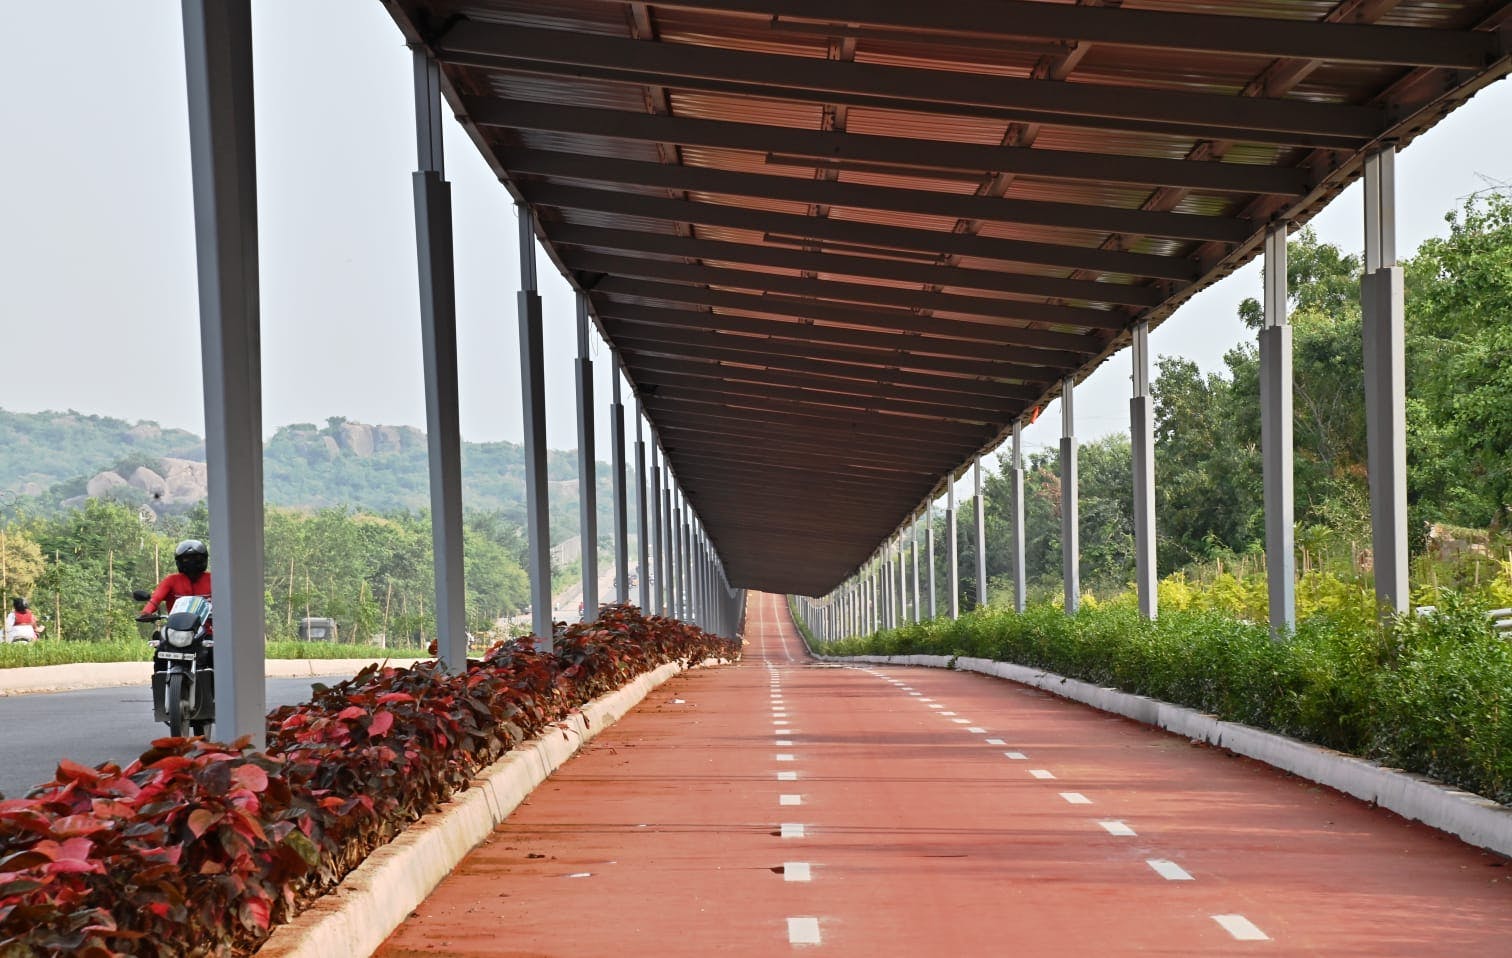 The First Solar Roof Cycling Track in India